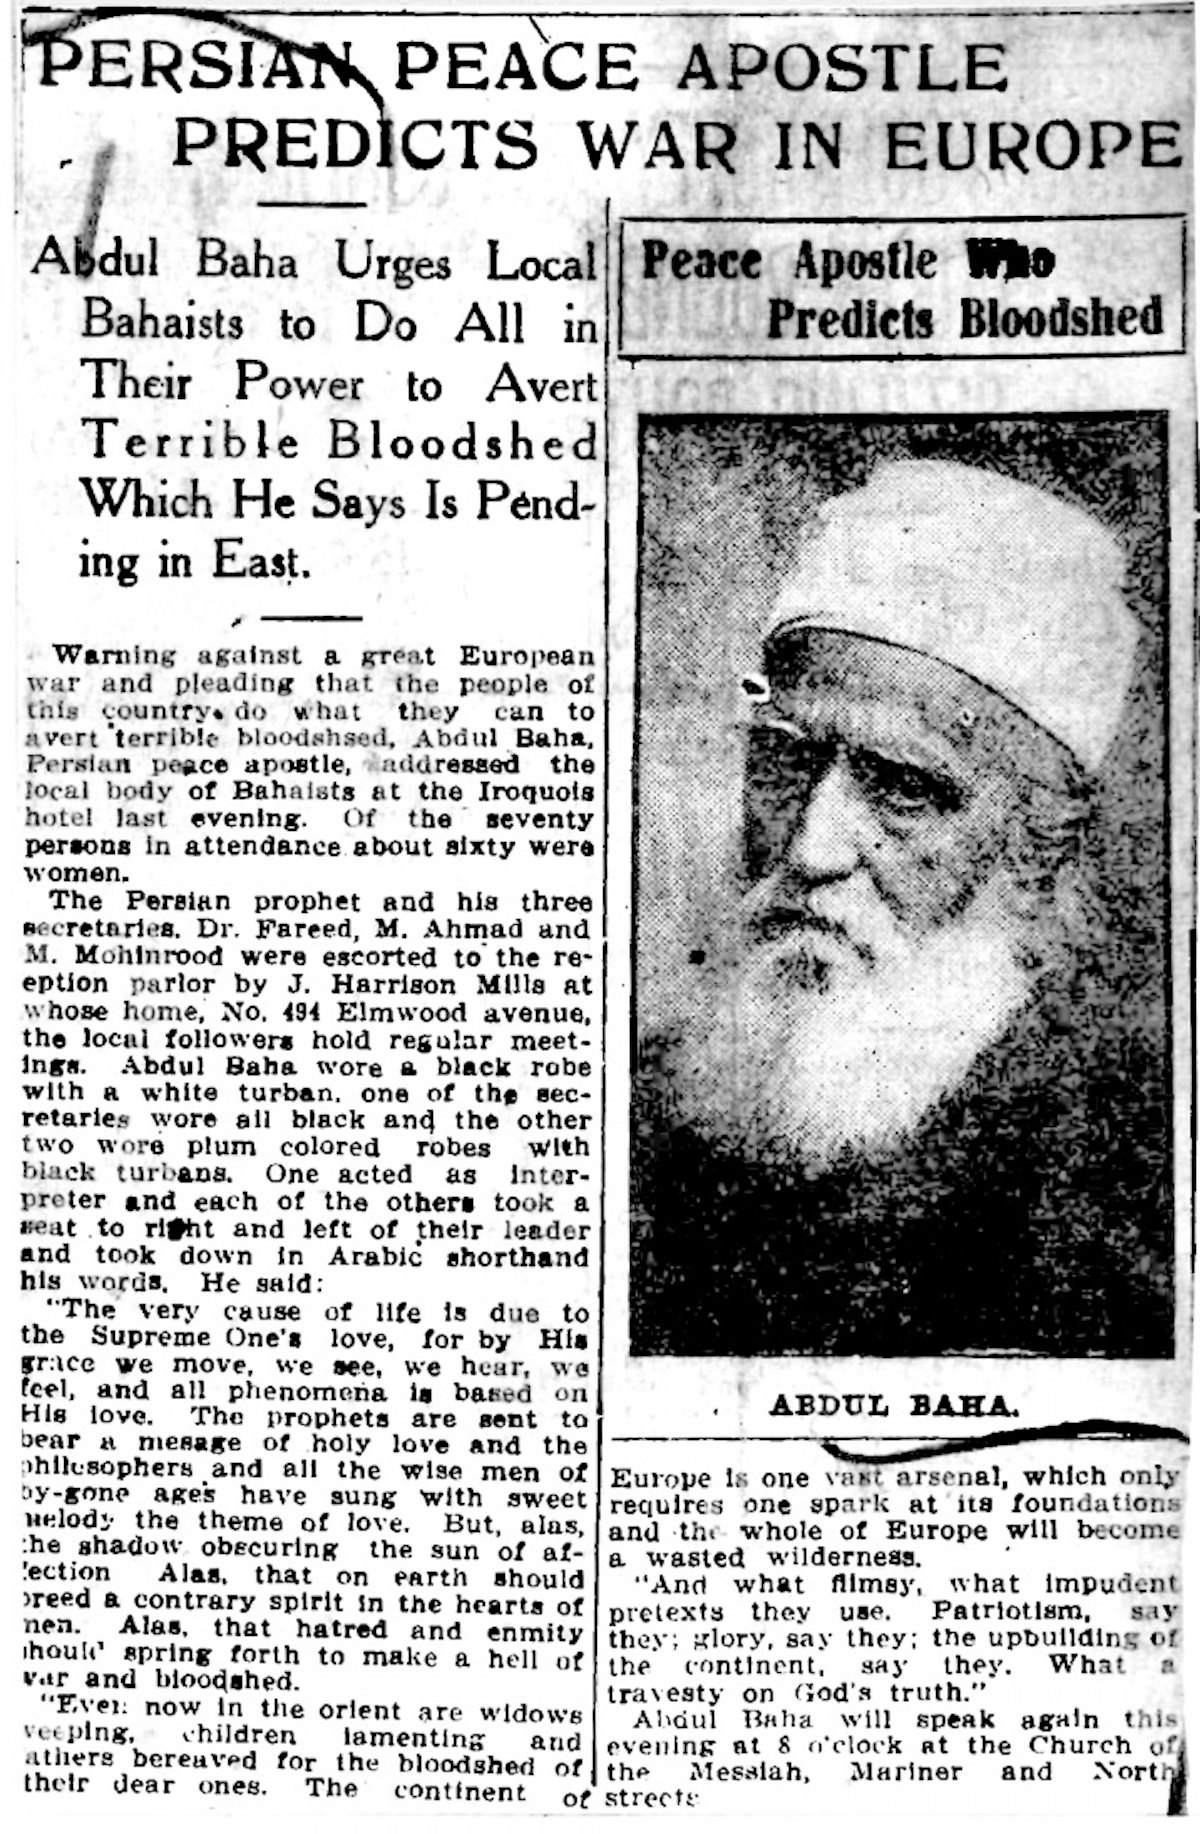 An article from the Buffalo Courier on 11 September 1912 reports on ‘Abdu’l-Baha’s talk the previous night, in which He predicted the coming war. “The continent of Europe is one vast arsenal, which only requires one spark at its foundations and the whole of Europe will become a wasted wilderness,” the newspaper quotes ‘Abdu’l-Baha as saying.